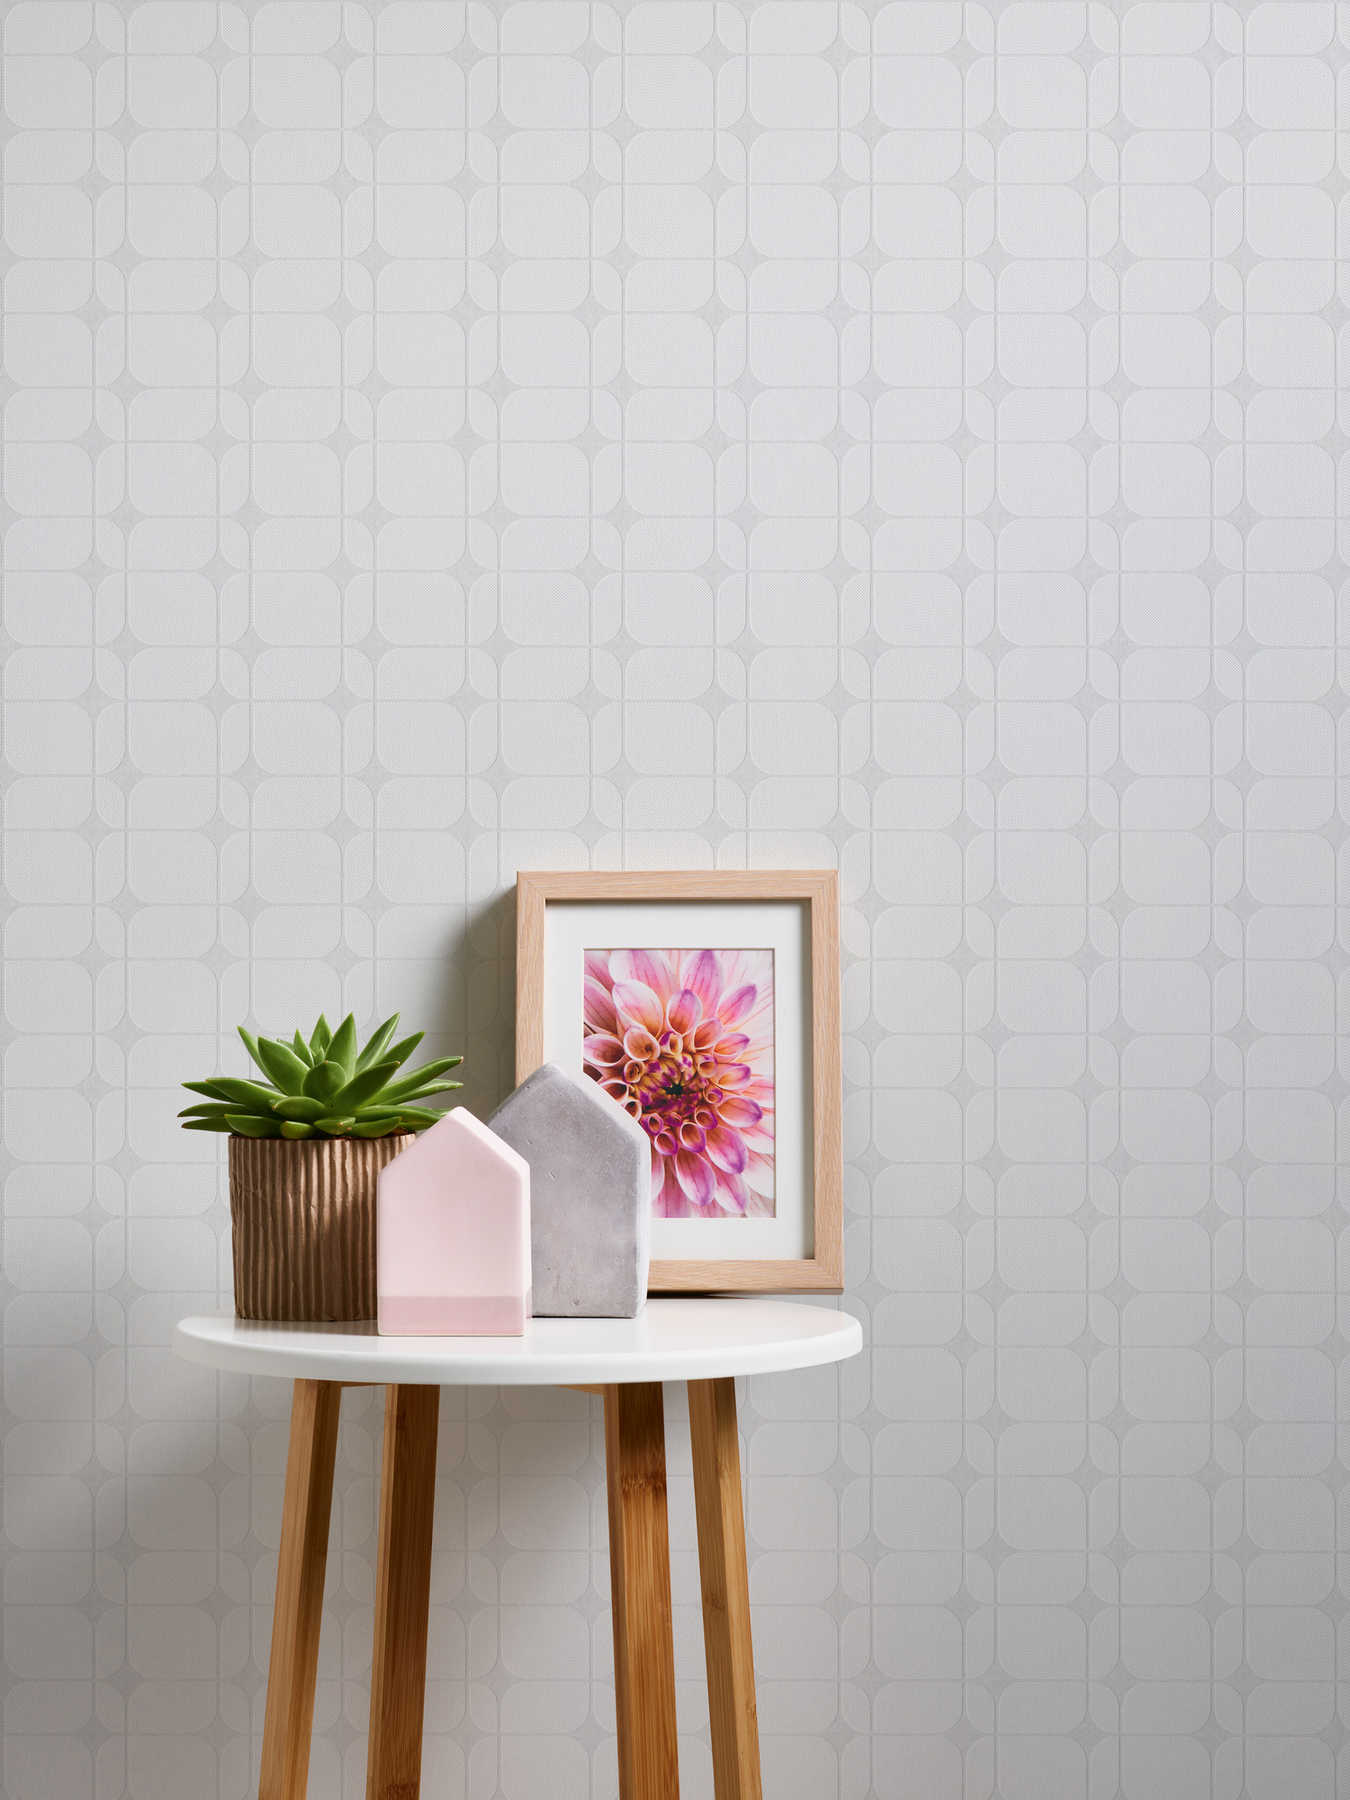             Paintable wallpaper with geometric retro pattern
        